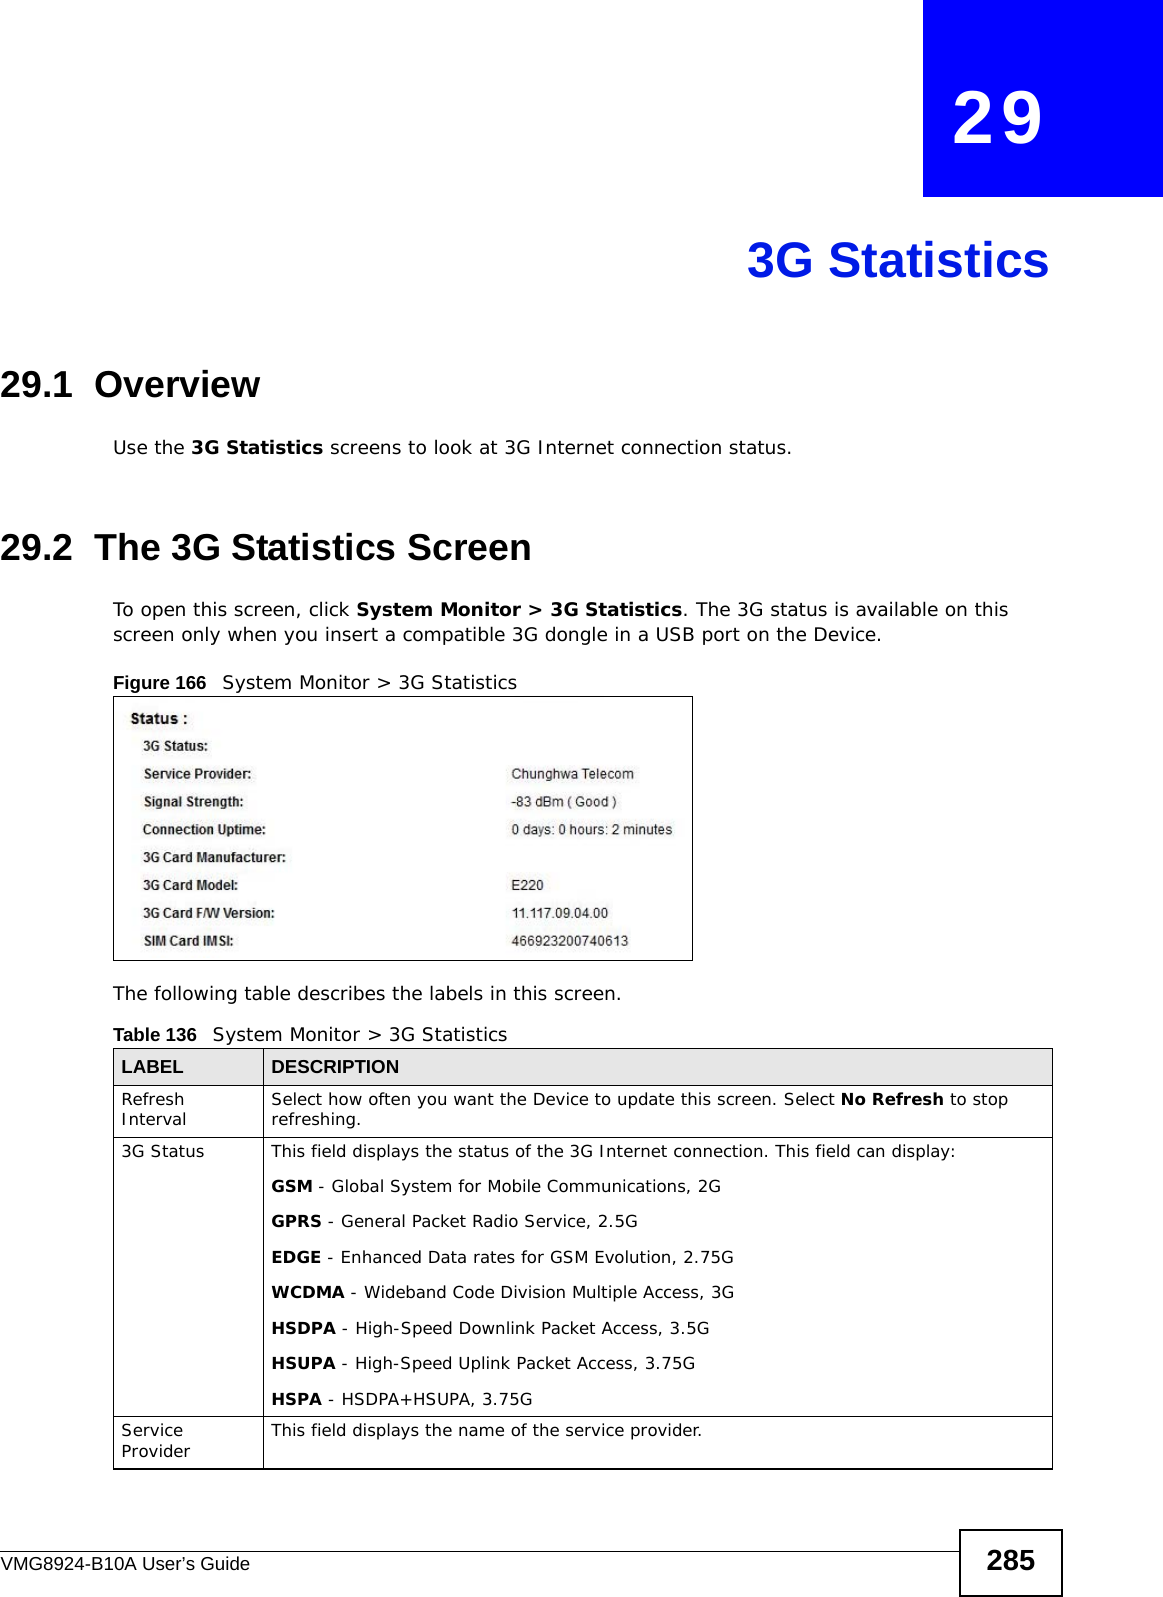 VMG8924-B10A User’s Guide 285CHAPTER   293G Statistics29.1  OverviewUse the 3G Statistics screens to look at 3G Internet connection status.29.2  The 3G Statistics ScreenTo open this screen, click System Monitor &gt; 3G Statistics. The 3G status is available on this screen only when you insert a compatible 3G dongle in a USB port on the Device.Figure 166   System Monitor &gt; 3G Statistics The following table describes the labels in this screen.  Table 136   System Monitor &gt; 3G StatisticsLABEL DESCRIPTIONRefresh Interval Select how often you want the Device to update this screen. Select No Refresh to stop refreshing.3G Status This field displays the status of the 3G Internet connection. This field can display:GSM - Global System for Mobile Communications, 2GGPRS - General Packet Radio Service, 2.5GEDGE - Enhanced Data rates for GSM Evolution, 2.75GWCDMA - Wideband Code Division Multiple Access, 3GHSDPA - High-Speed Downlink Packet Access, 3.5GHSUPA - High-Speed Uplink Packet Access, 3.75GHSPA - HSDPA+HSUPA, 3.75GService Provider This field displays the name of the service provider.